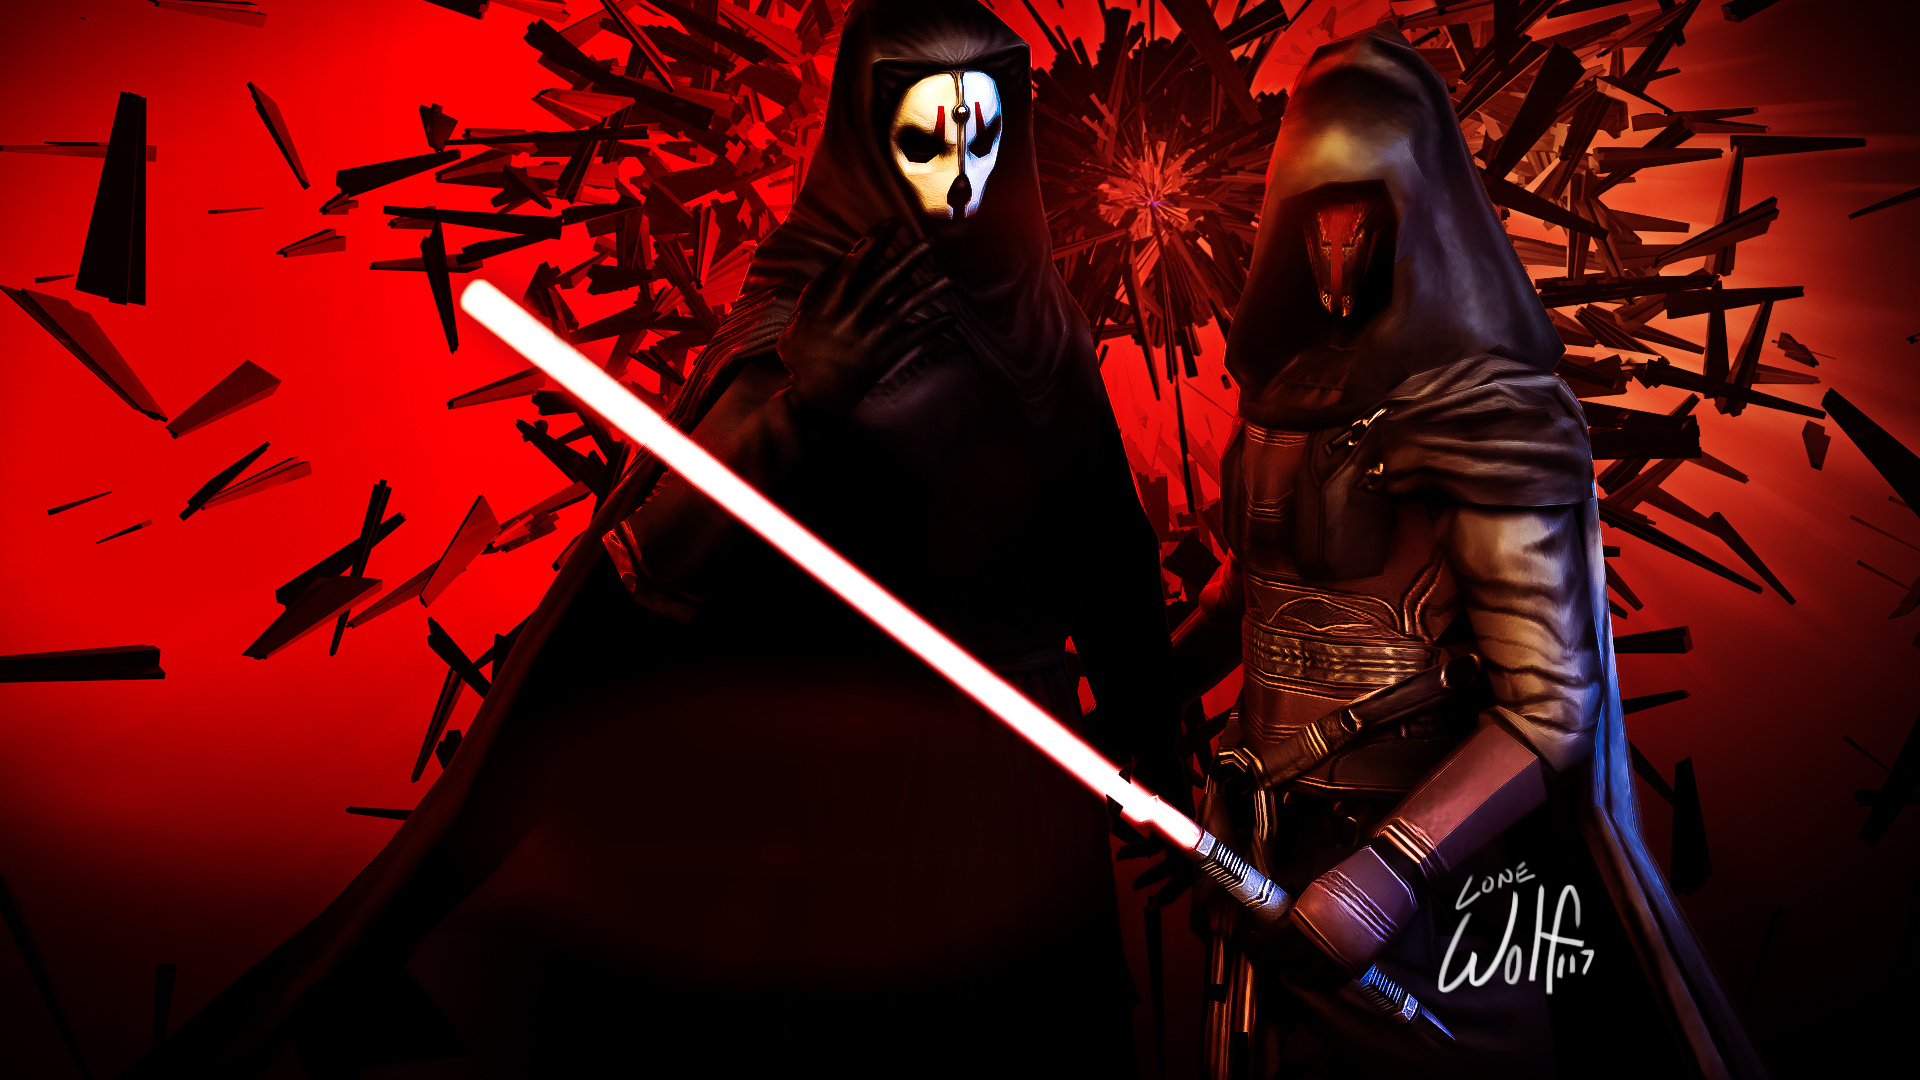 Sith Lord Wallpaper The sith lords by lonewolf117